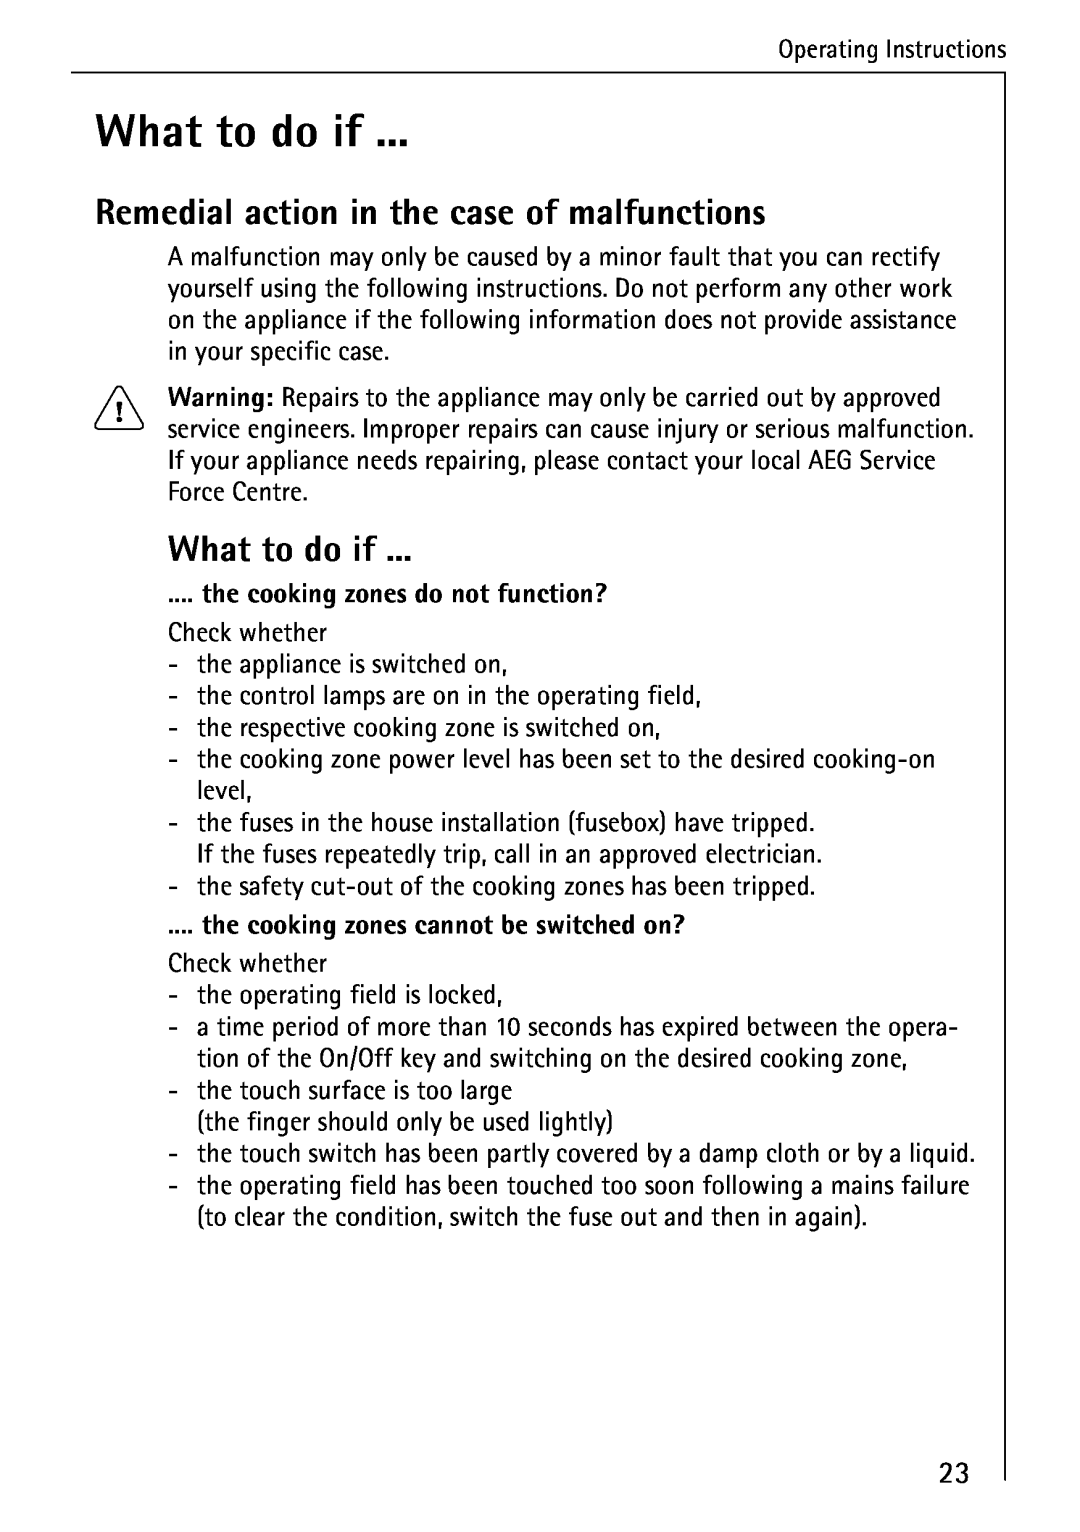 Electrolux 65300KF-an operating instructions What to do if, Remedial action in the case of malfunctions 